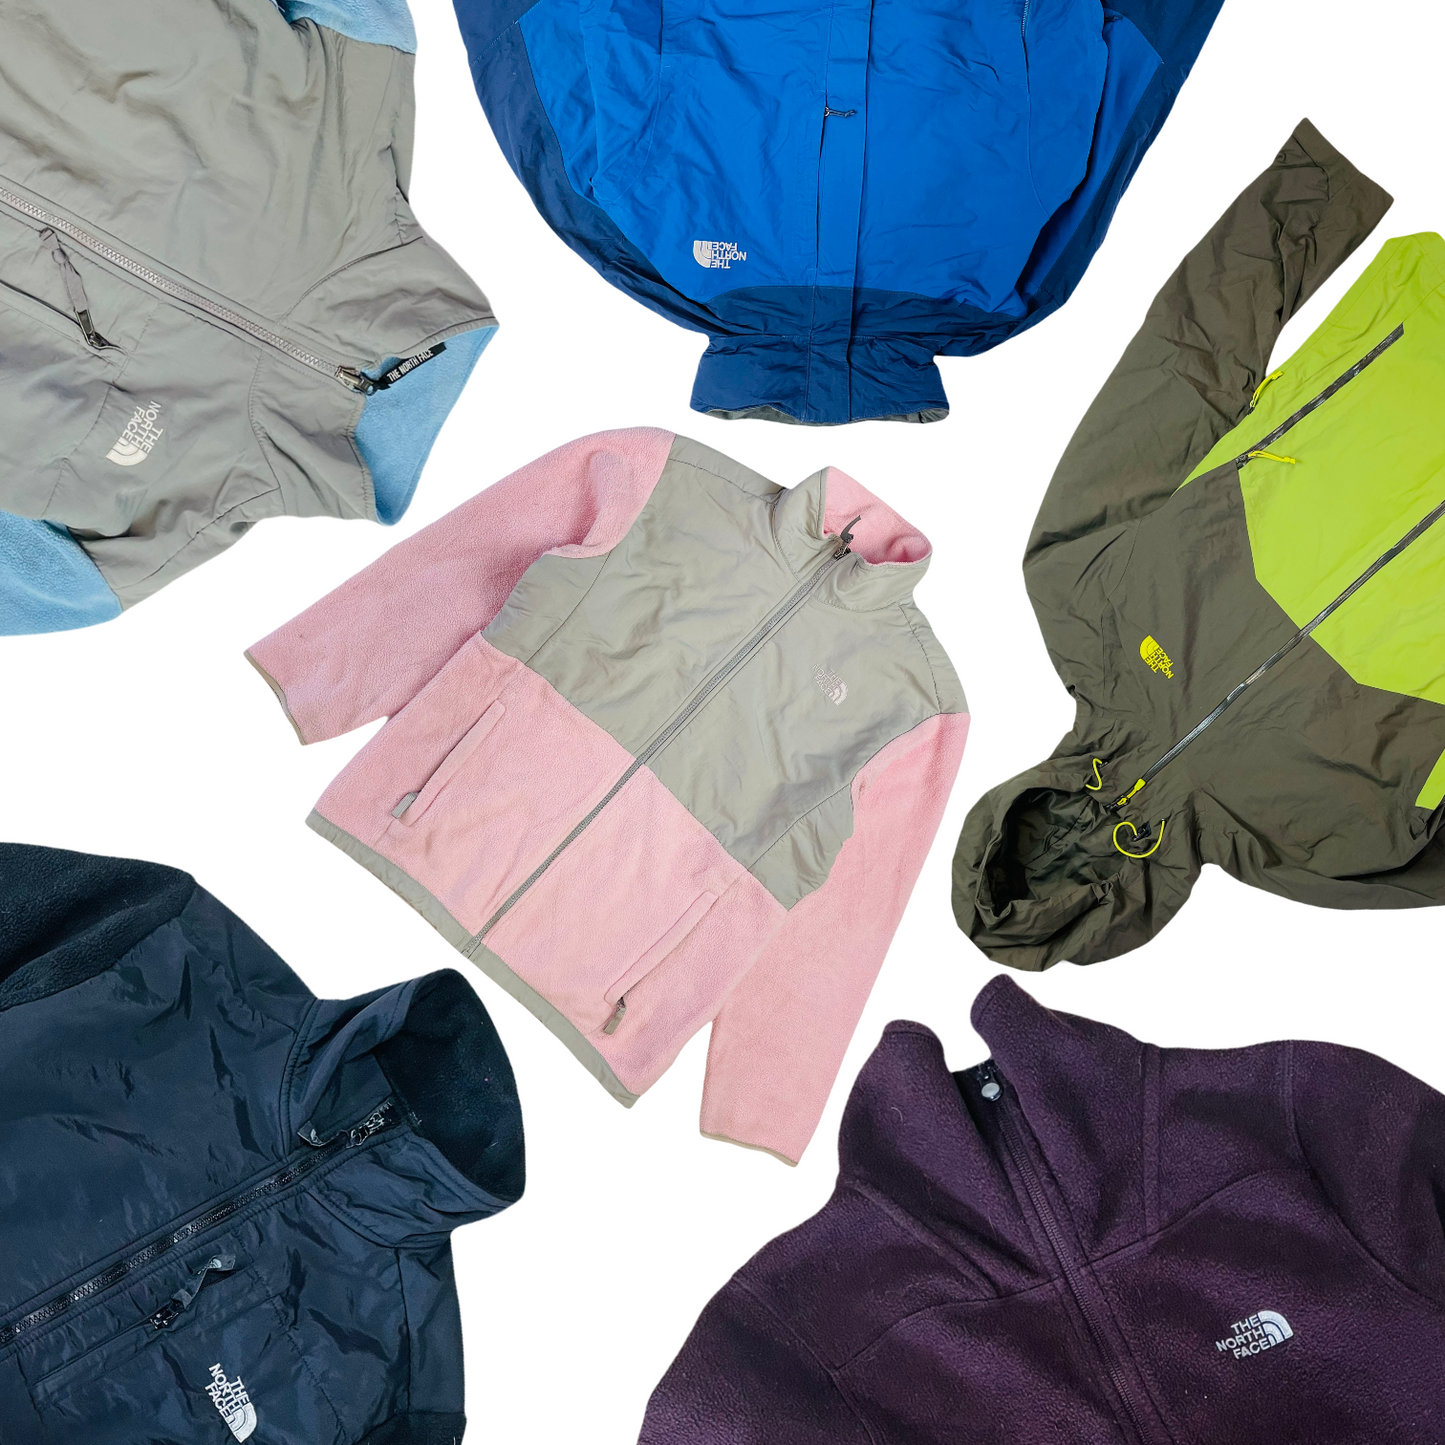 25kg North Face Brand Mix - BALE